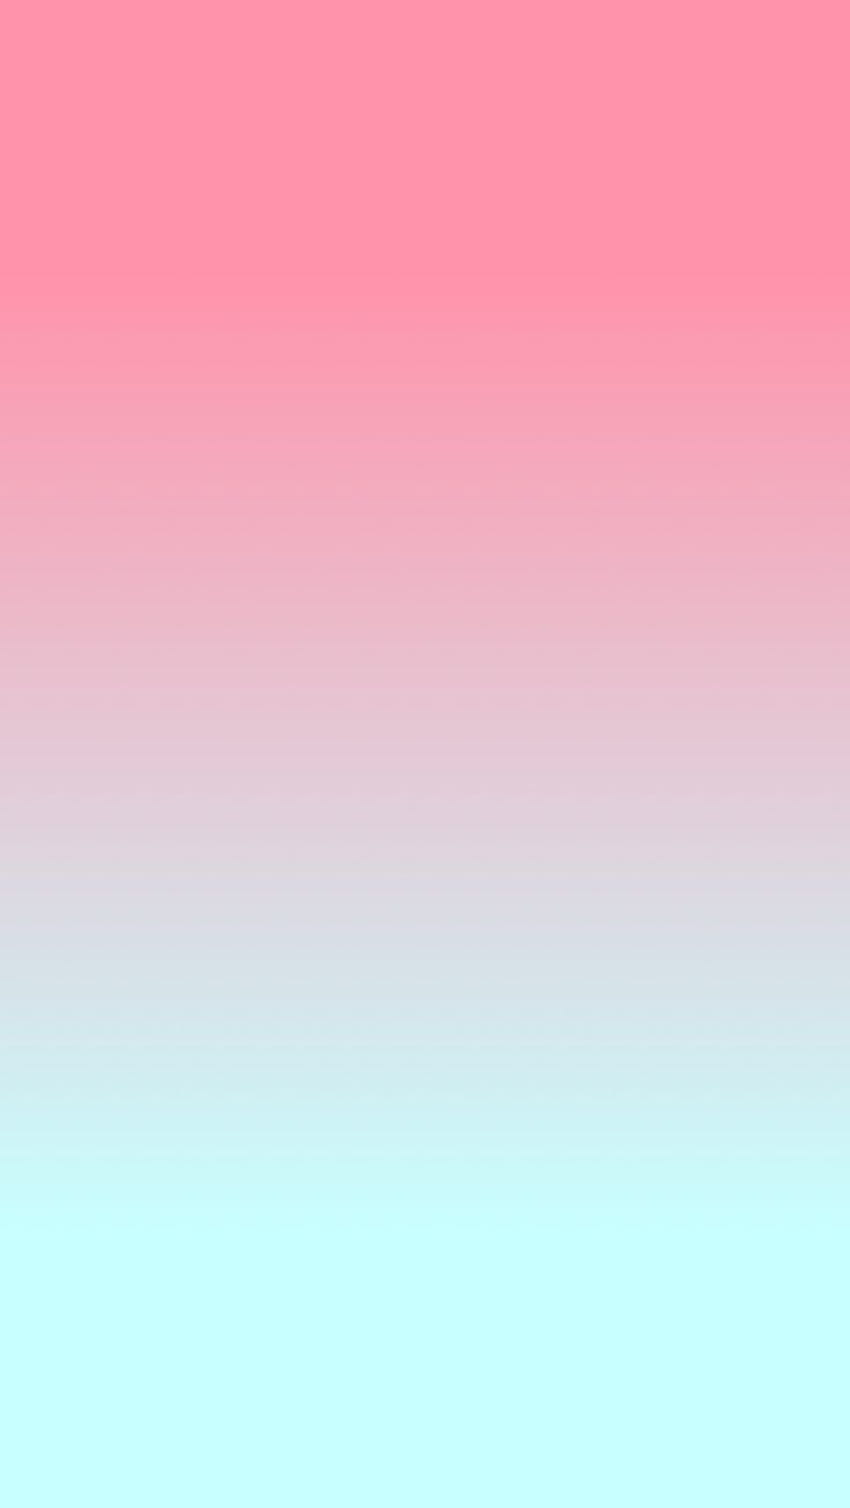 Ombre Tumblr Backgrounds Pink and blue ombre iphone ombre aesthetic pastel  HD phone wallpaper  Pxfuel